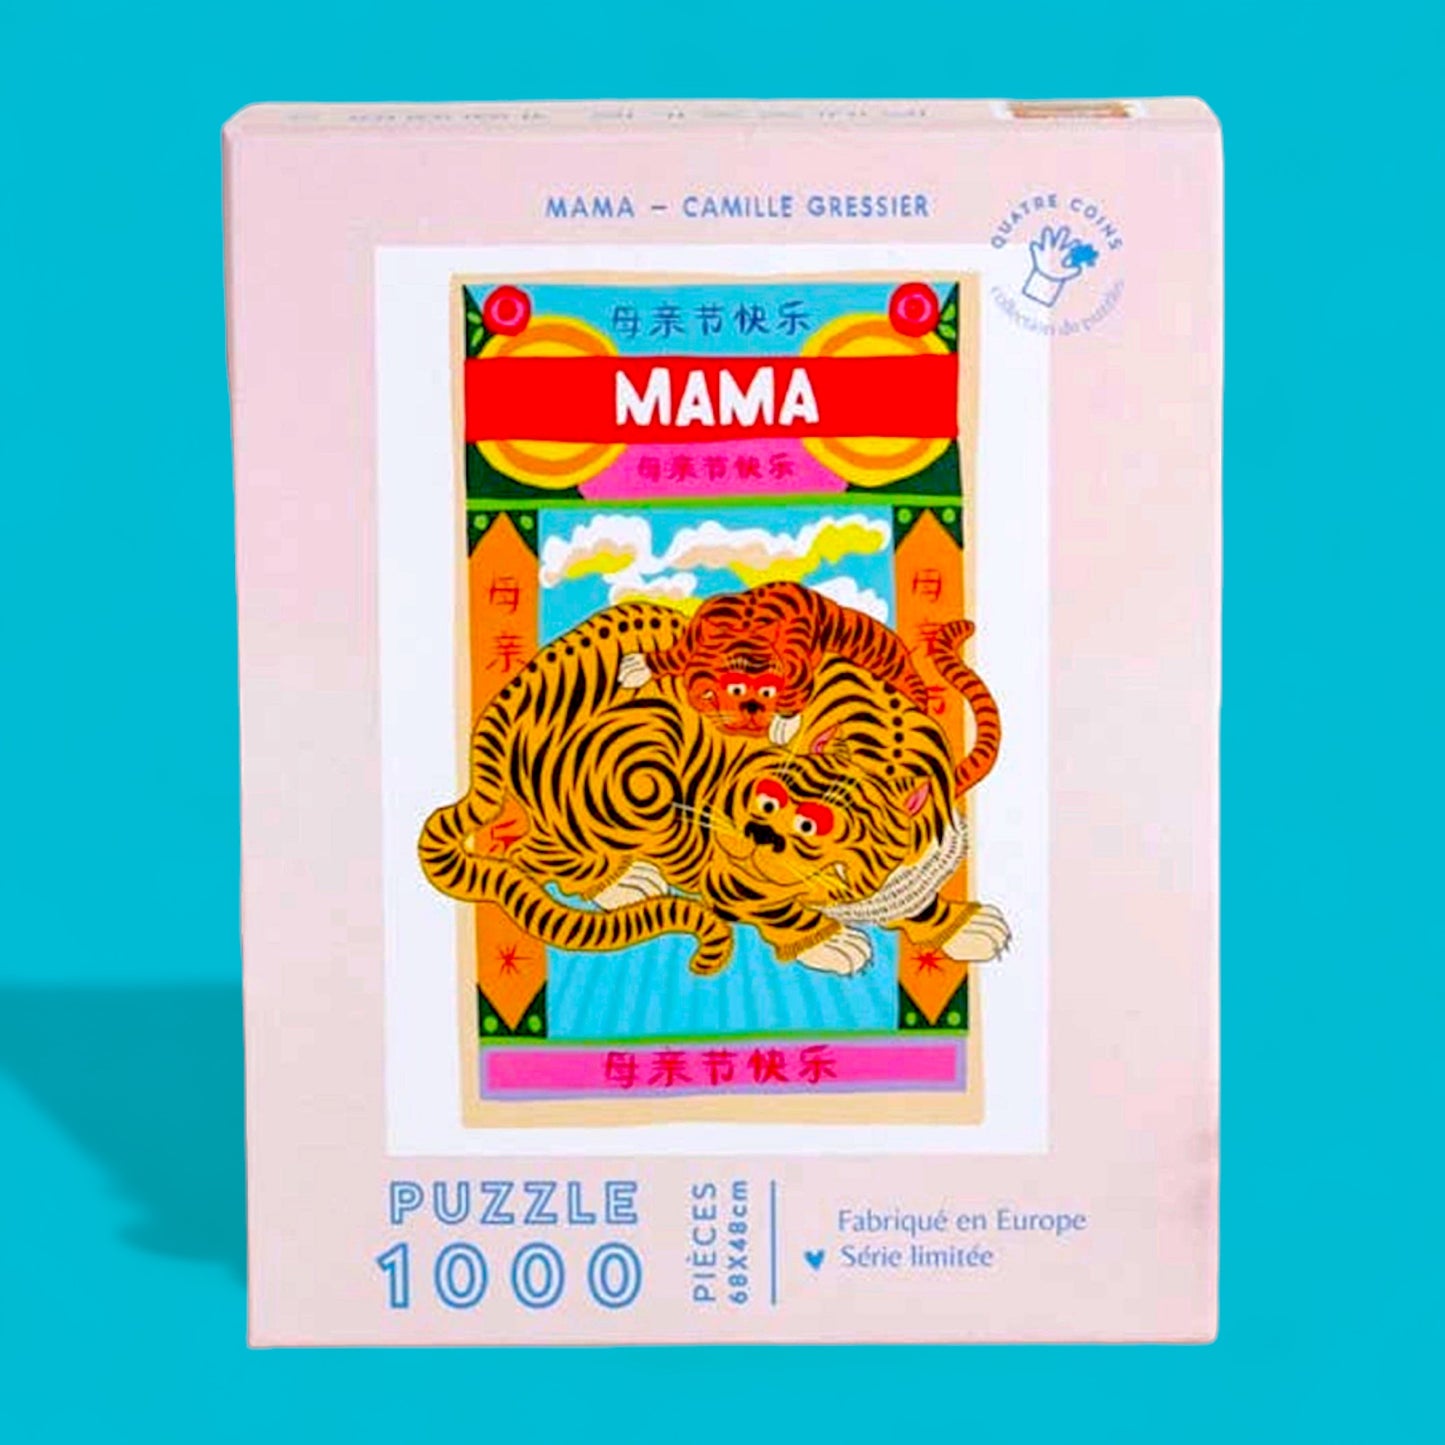 Mama Puzzle by Camille Gressier